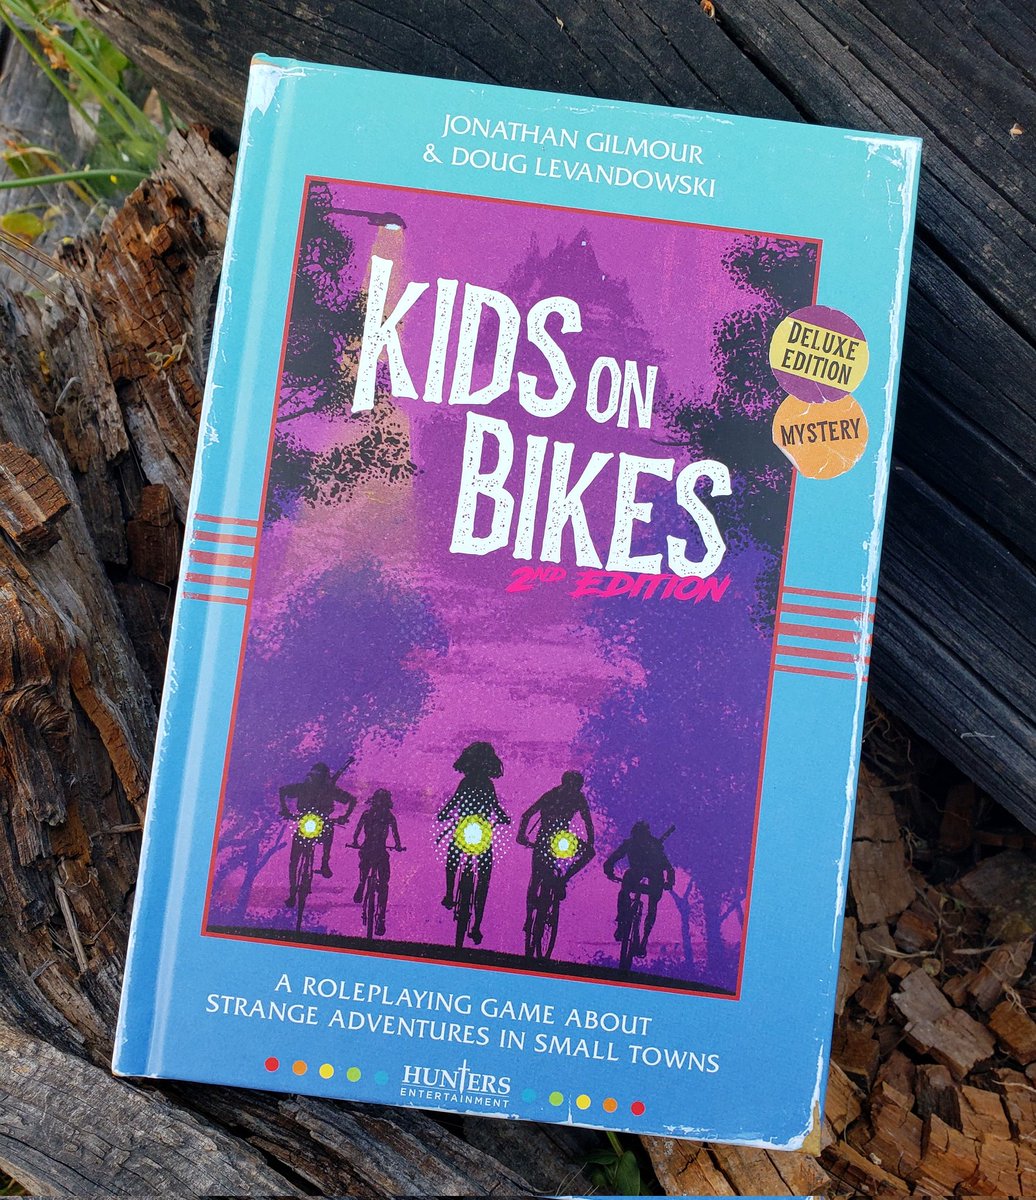 My copy of #KidsonBikes 2nd Edition Deluxe Hardcover from @Hunters_Ent arrived!

It's also the first @Kickstarter that I backed as well. Can't wait to play it!

#kidsonbikes2e #kob2e #huntersentertainment #ttrpg #ttrpgcommunity #tabletoprpg #gamers #kickstarter #mailcall